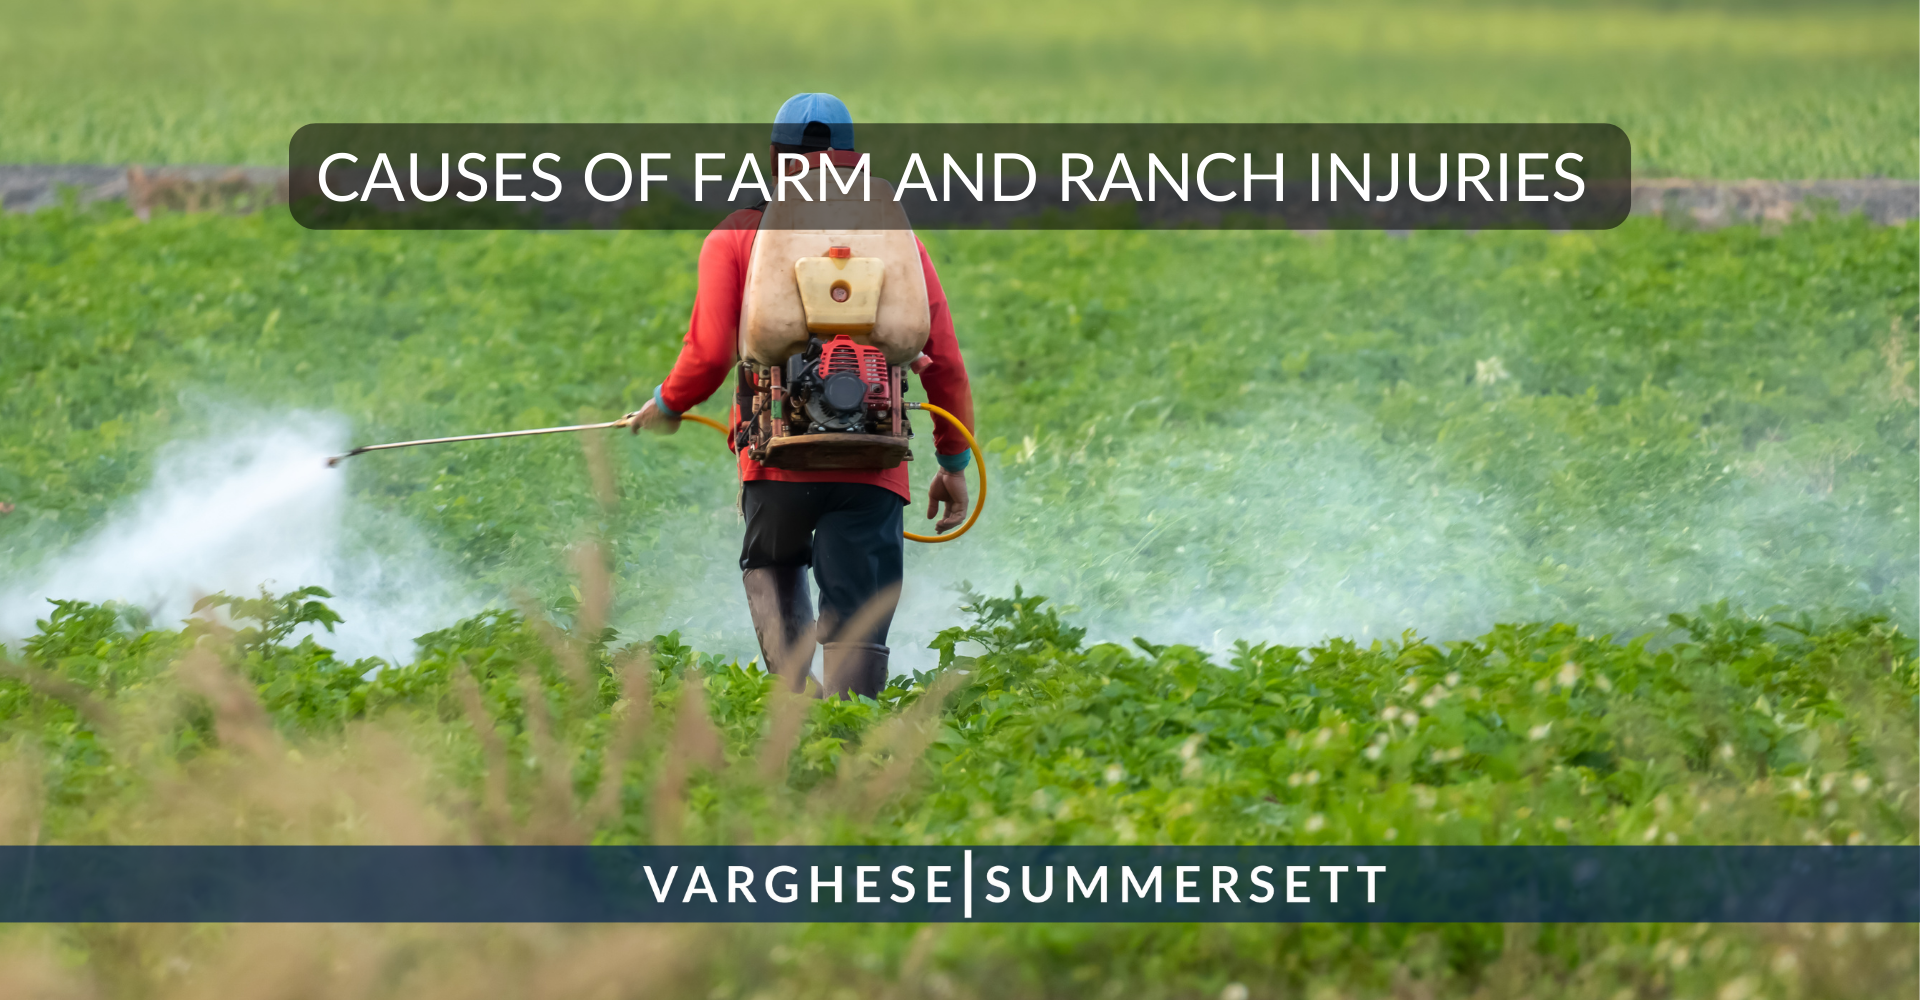 Causes of farm and ranch injuries